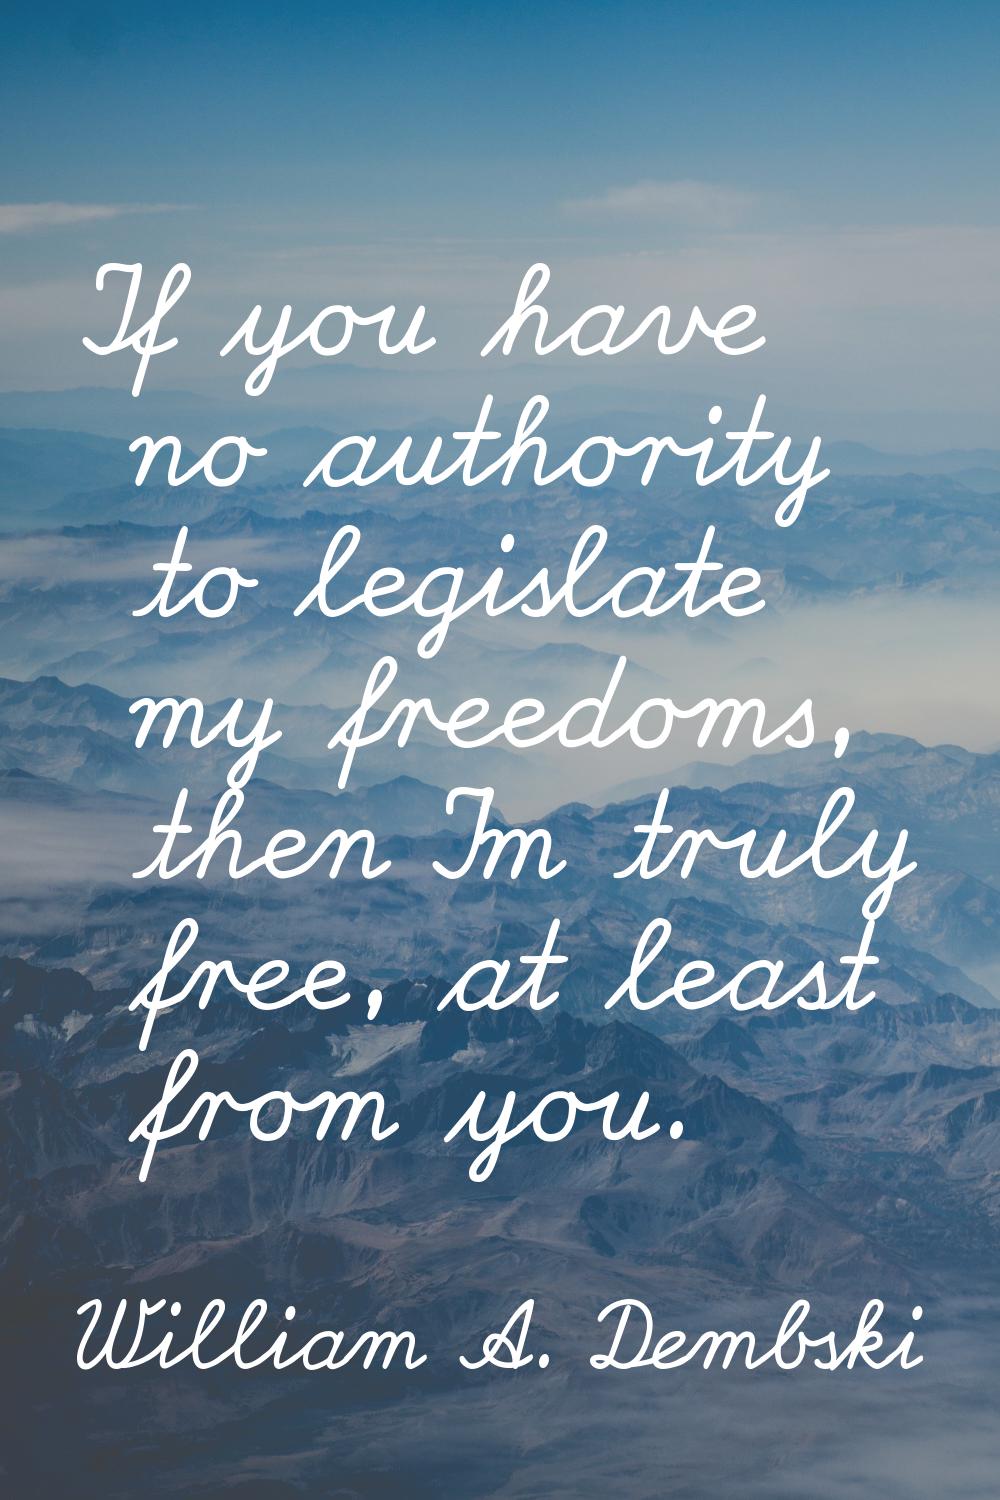 If you have no authority to legislate my freedoms, then I'm truly free, at least from you.